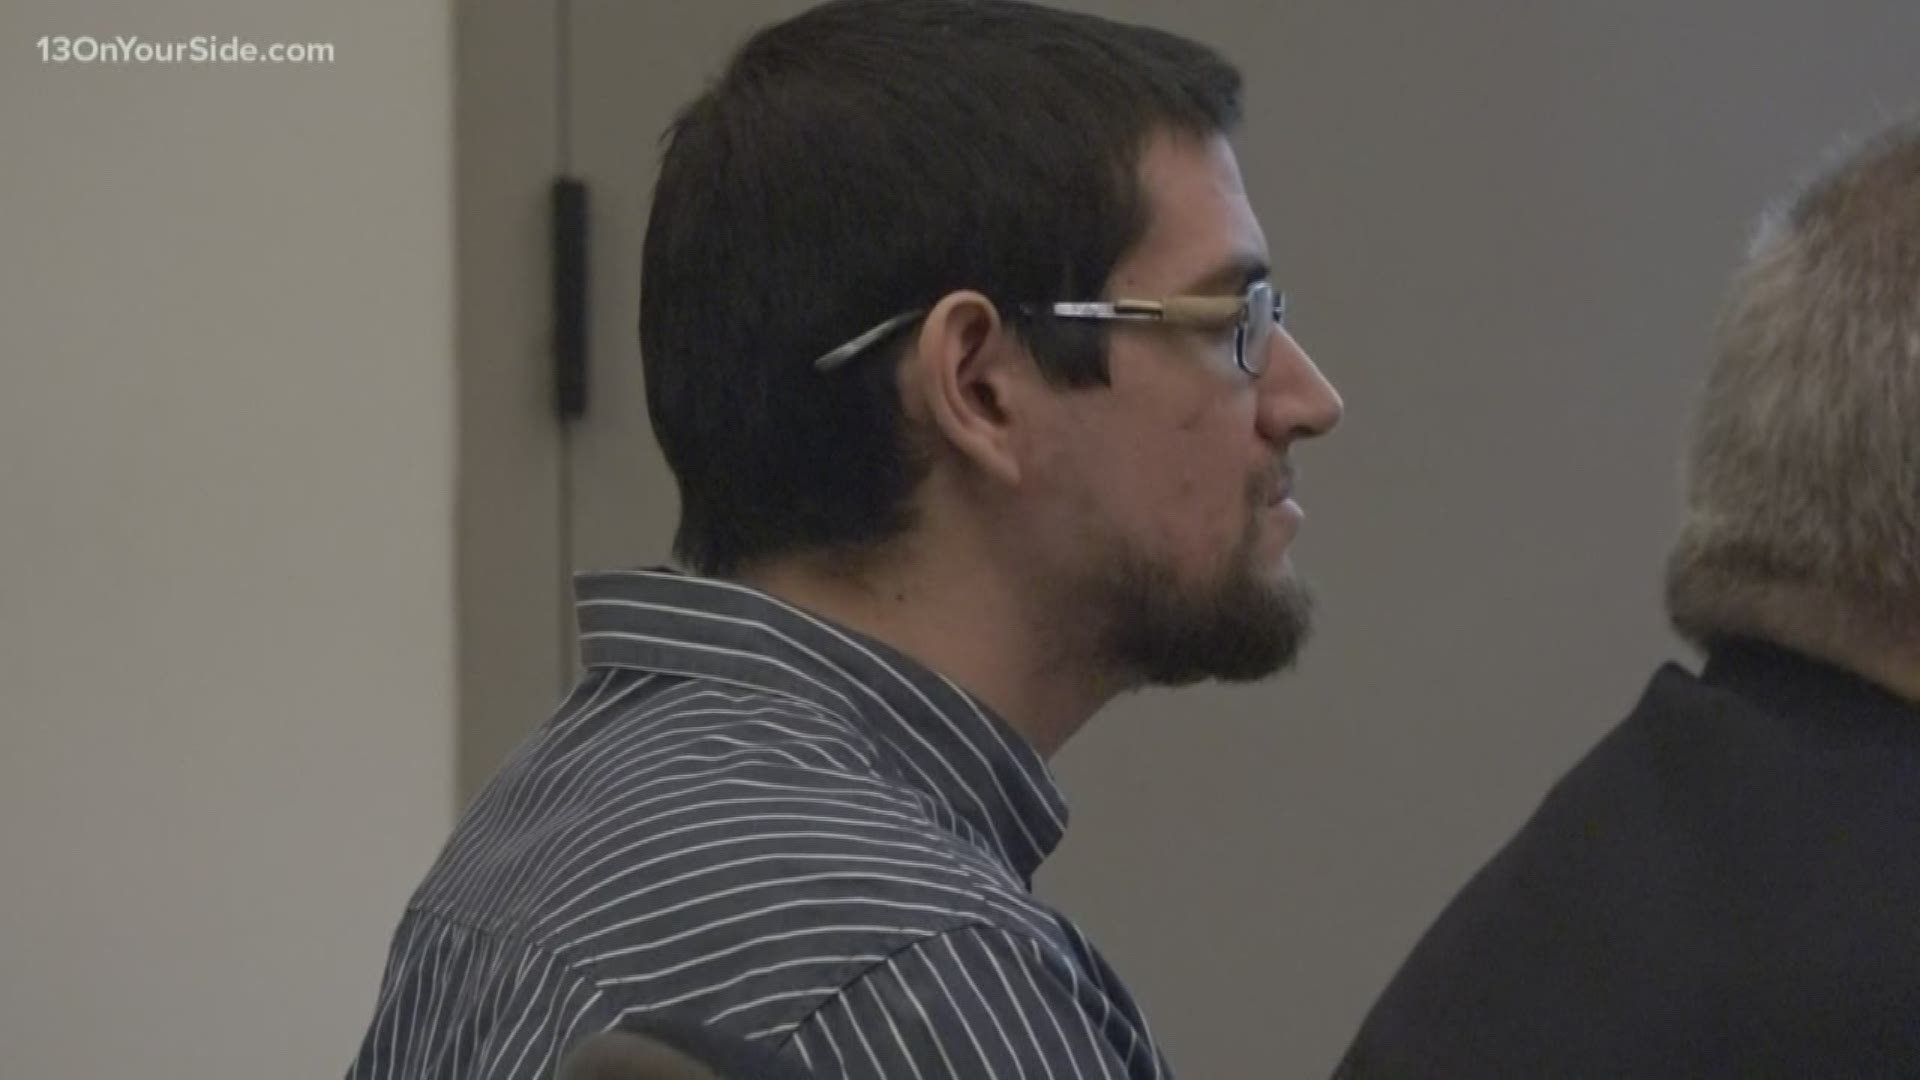 Seth Welch faces felony murder and first degree child abuse charges in the death of his infant daughter Mary.